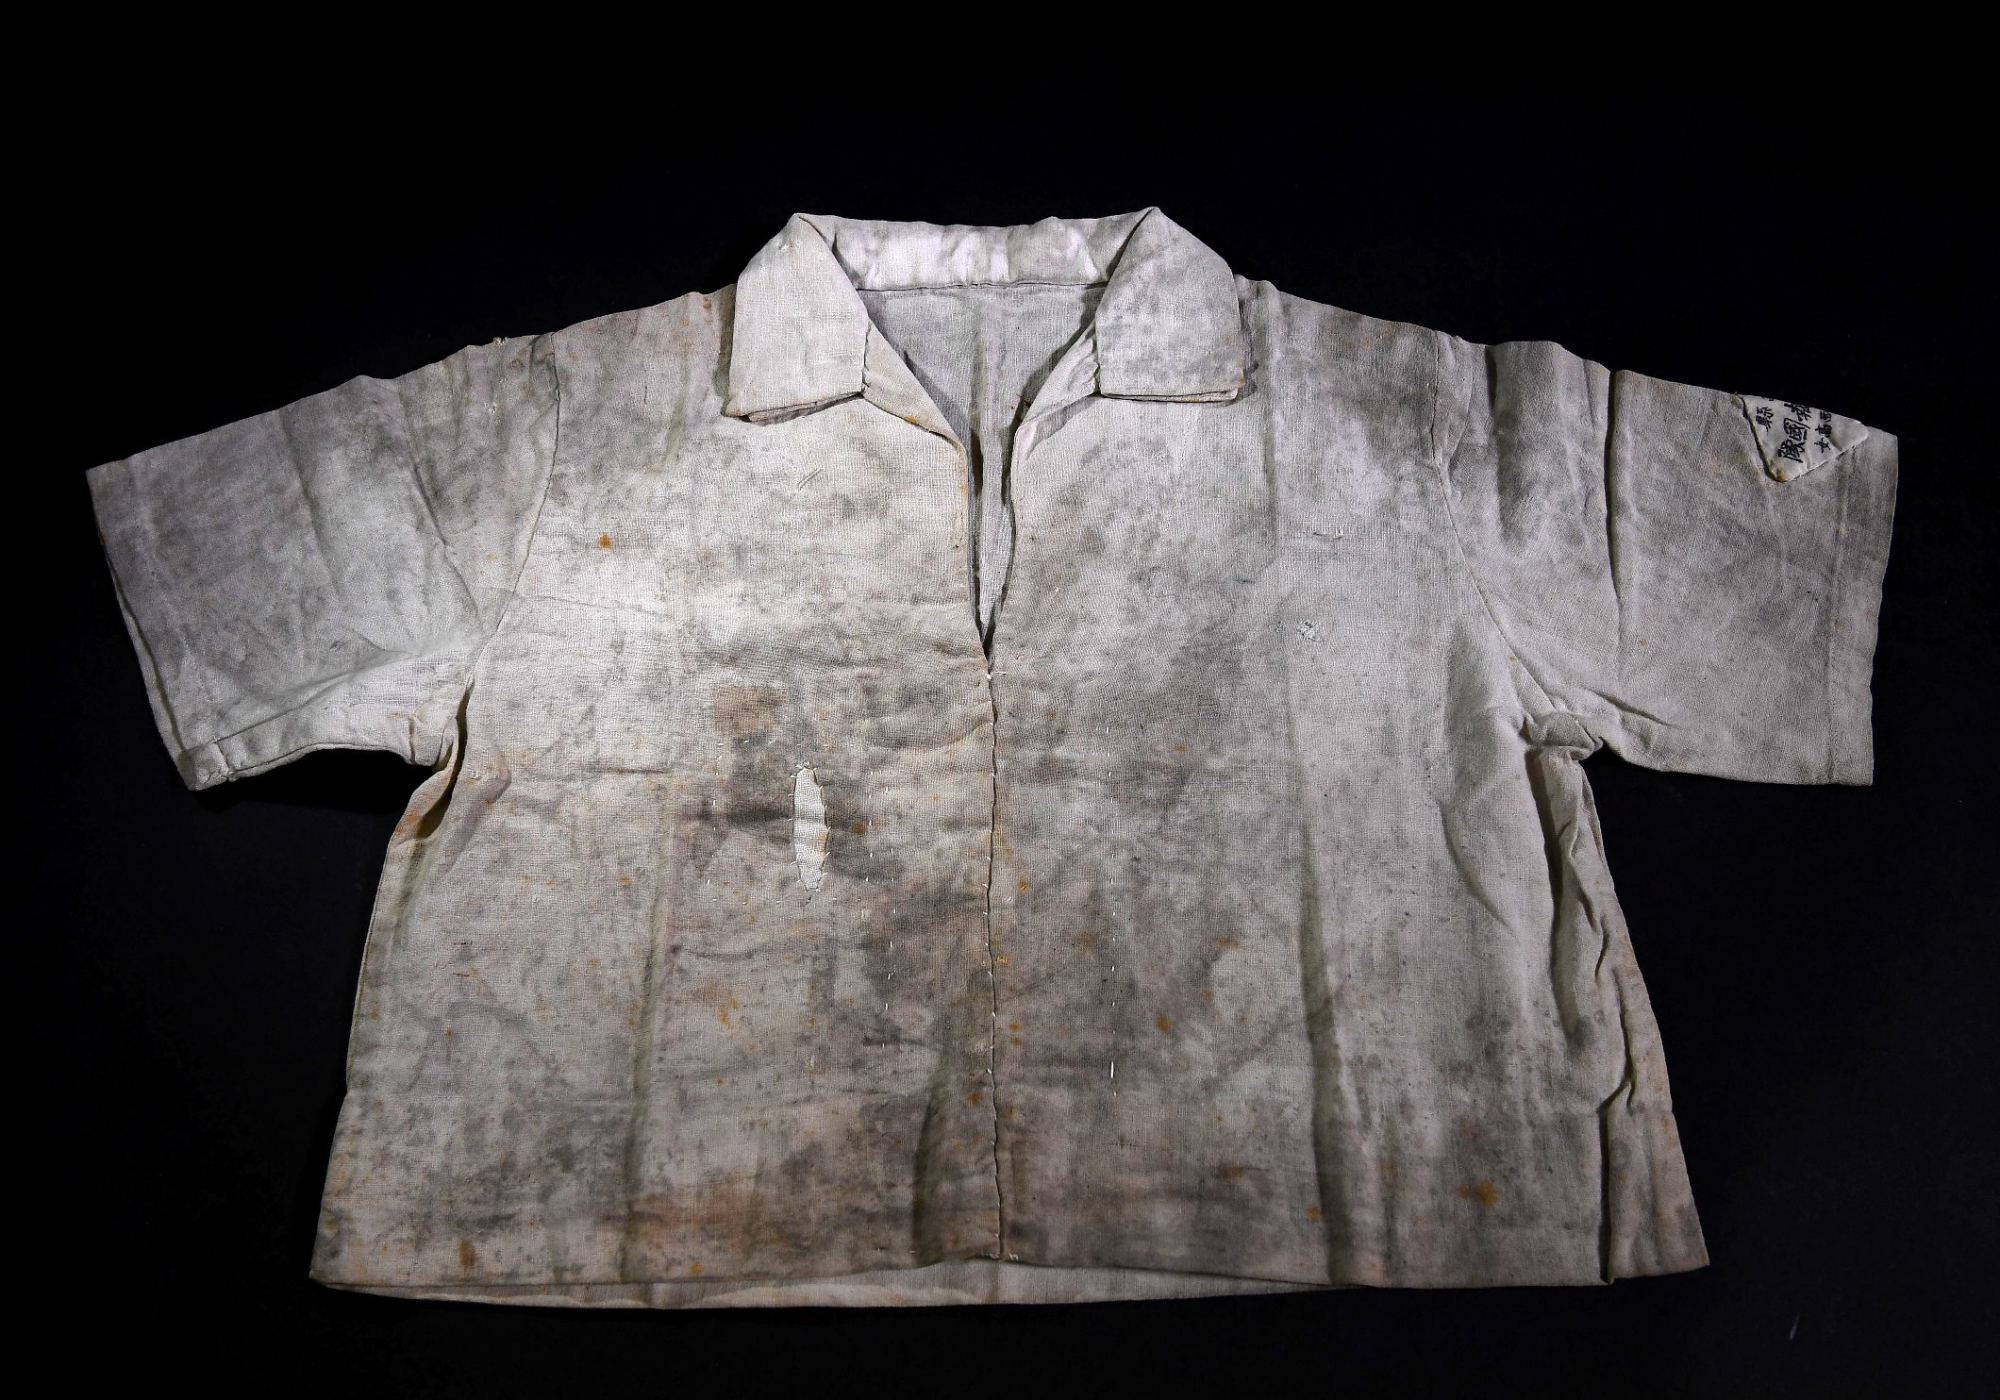 A shirt donated by Toyoko Matsumiya in 2012 to the Hiroshima Peace Memorial Museum still shows stains from so-called black rain, containing radioactive fallout, that fell on Aug. 6, 1945, after an atomic bomb destroyed the city. | CHUGOKU SHIMBUN